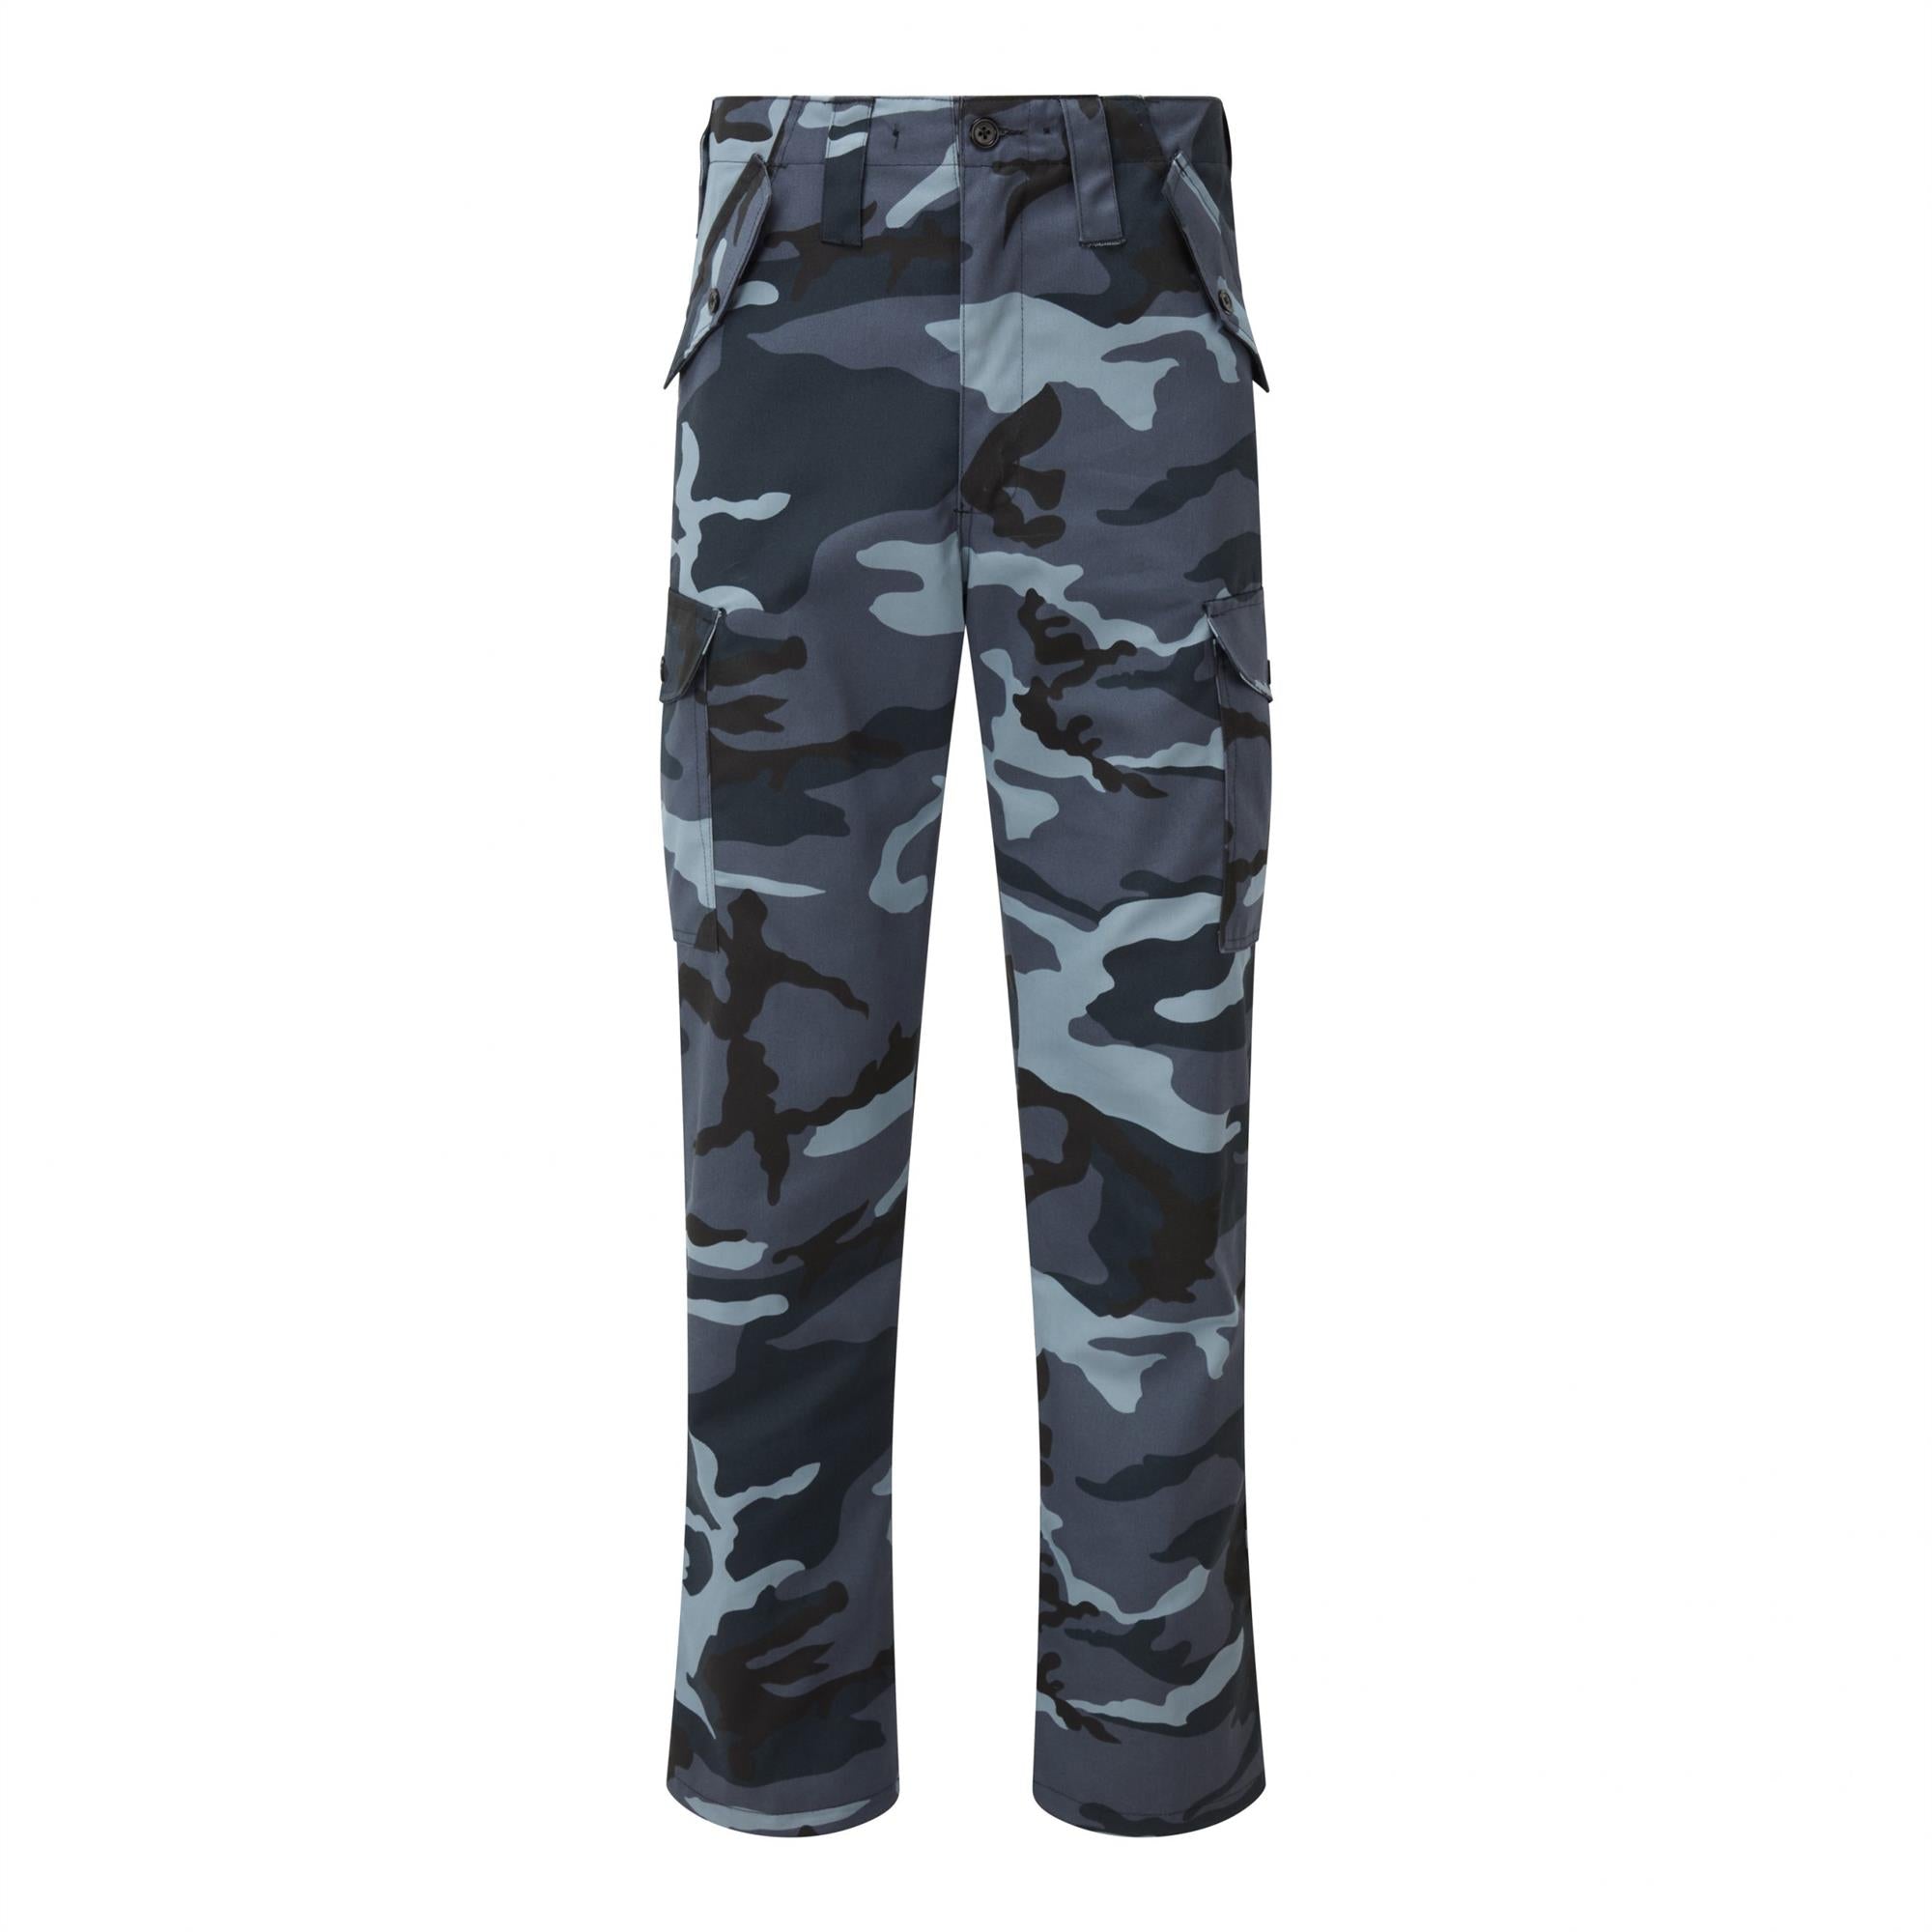 Camouflage work fashion camo army military paint ball outdoor cargo combat trousers #901